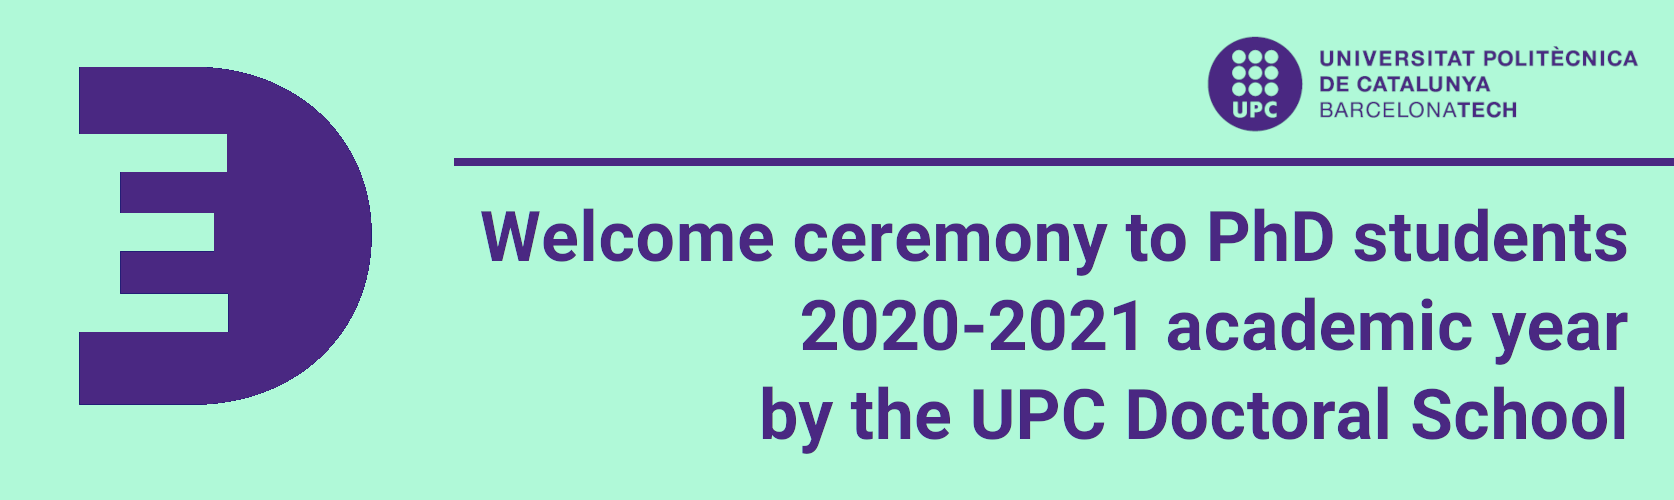 welcome_ceremony4.png